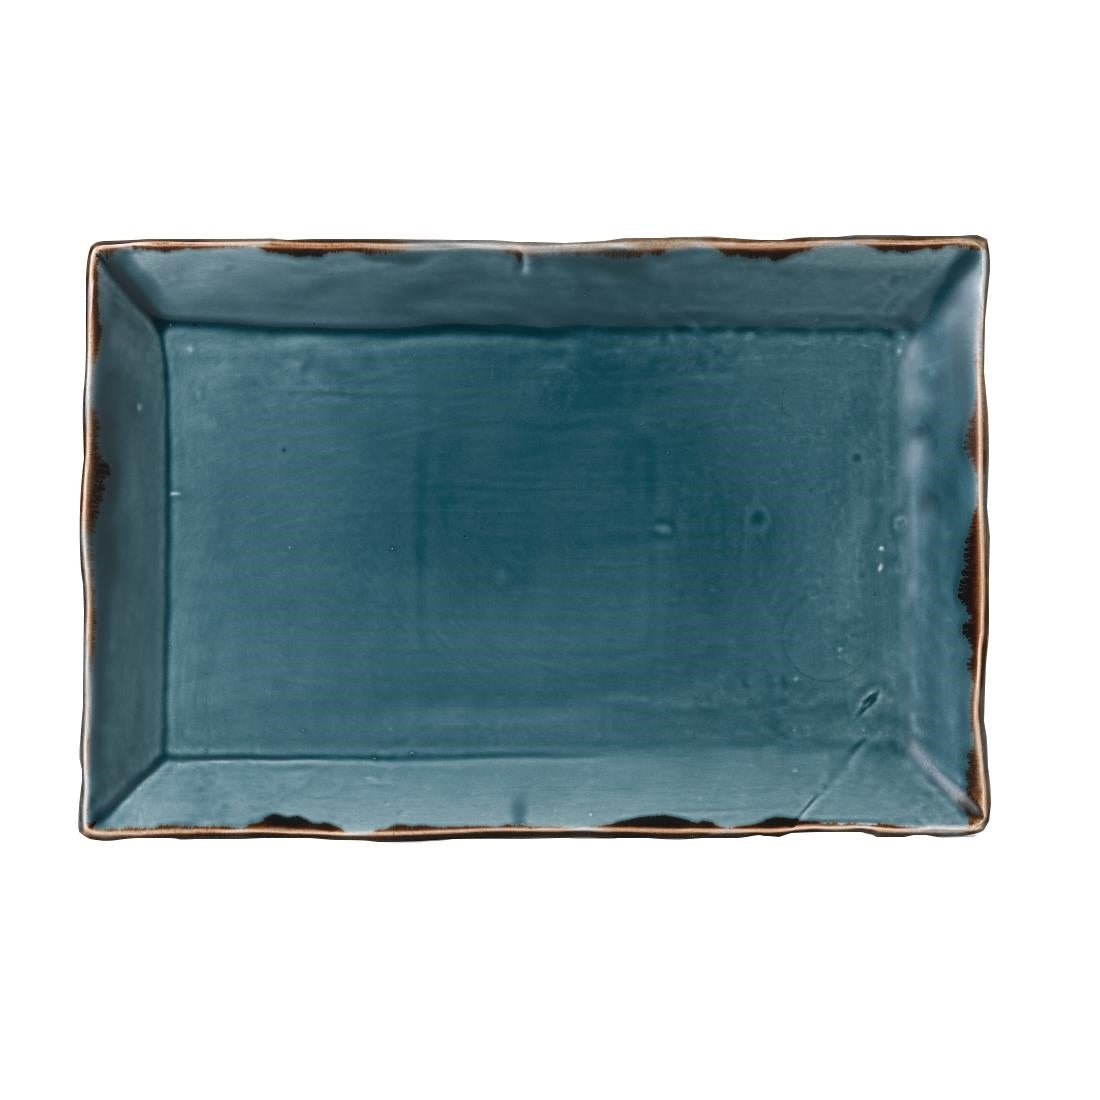 FC065 Dudson Harvest Rectangular Trays Blue 230 x 336mm (Pack of 6) JD Catering Equipment Solutions Ltd